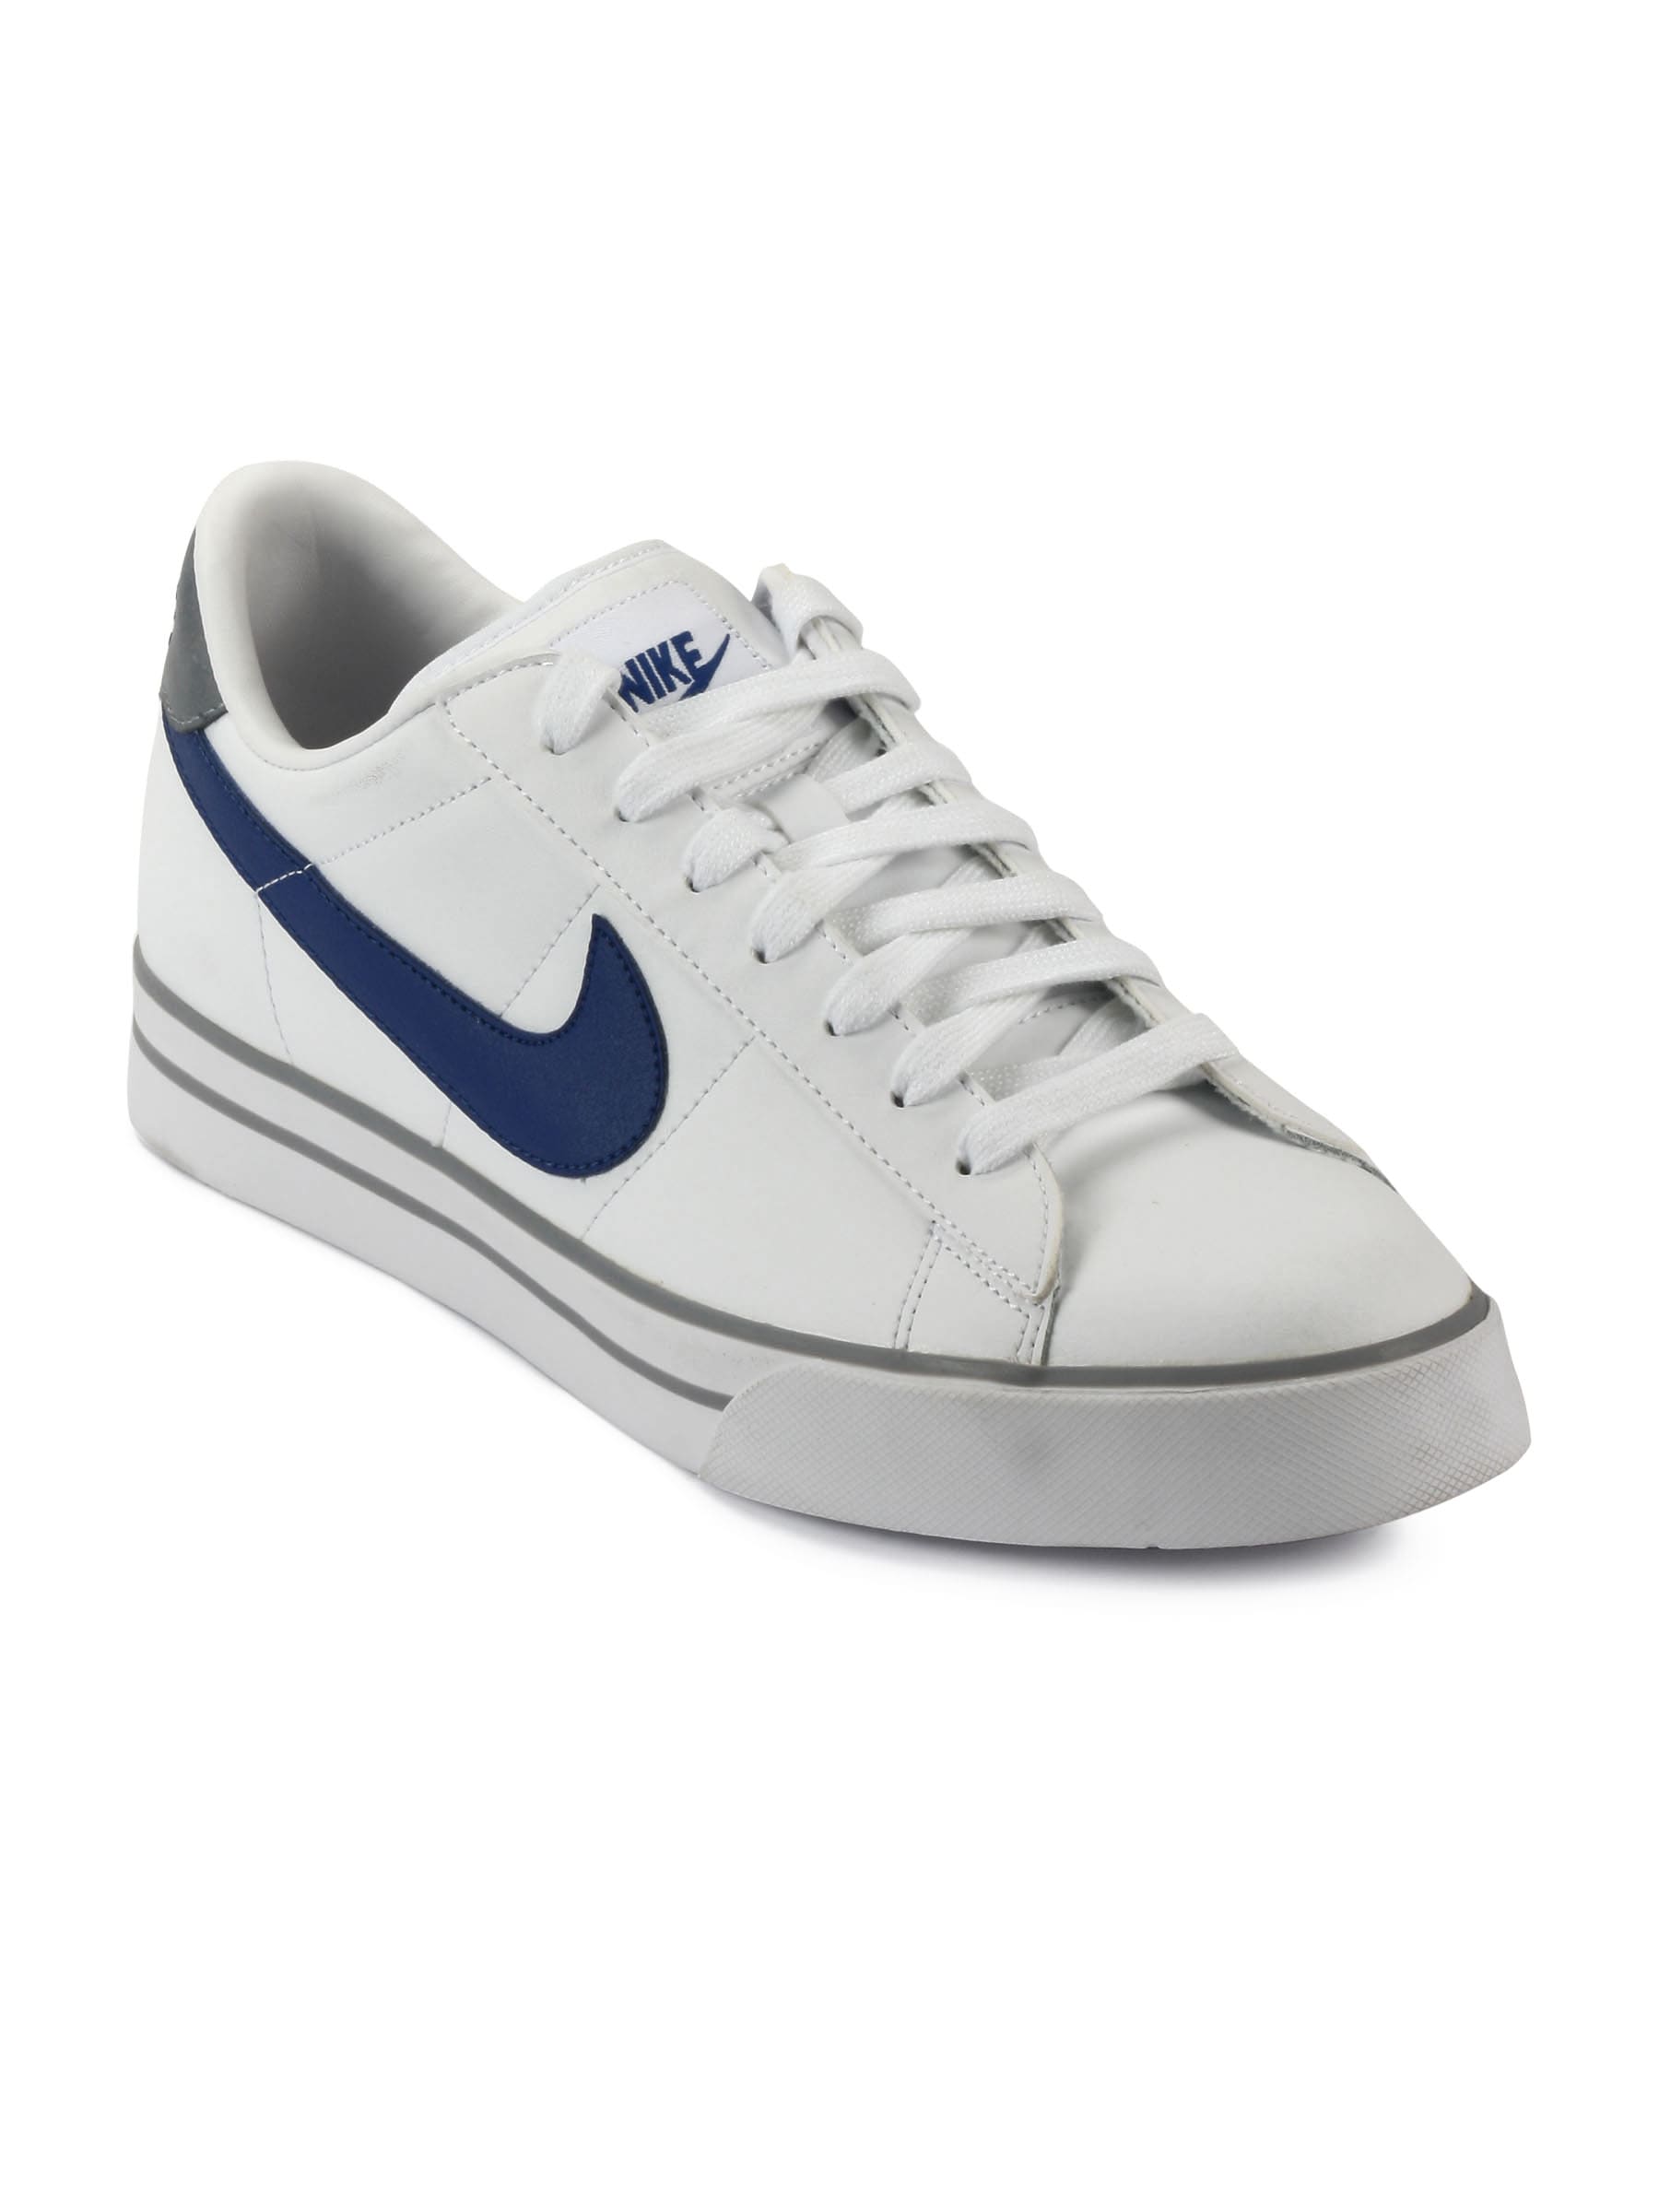 Nike Men Sweet Classic Leather White Casual Shoes